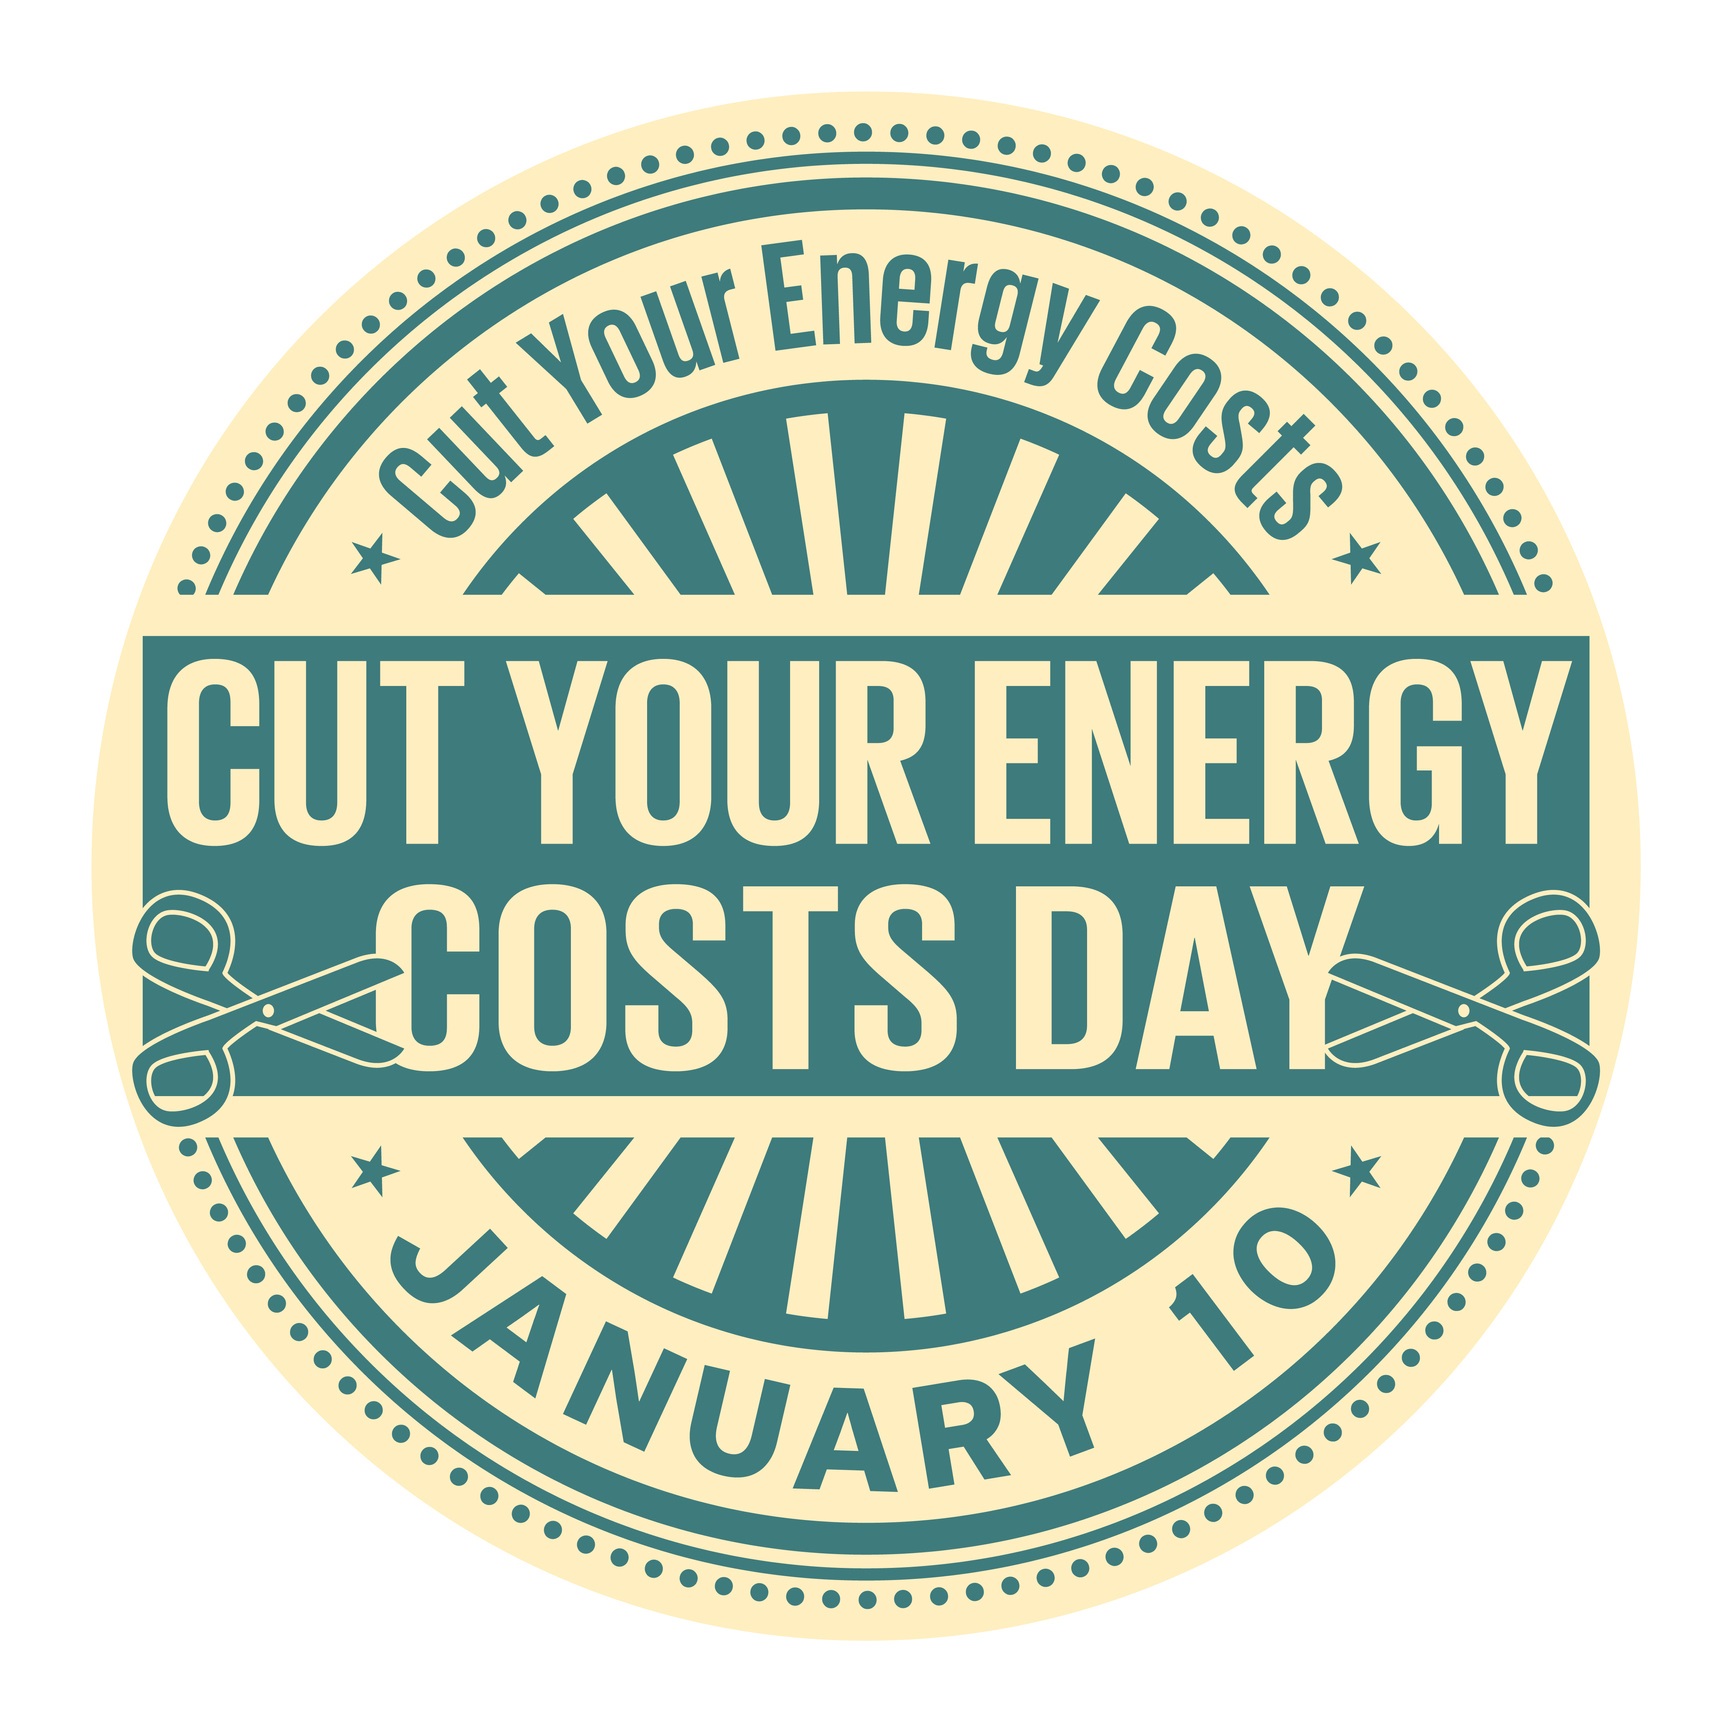 Photo for CITY OF THOMASVILLE CELEBRATES NATIONAL CUT YOUR ENERGY COSTS DAY